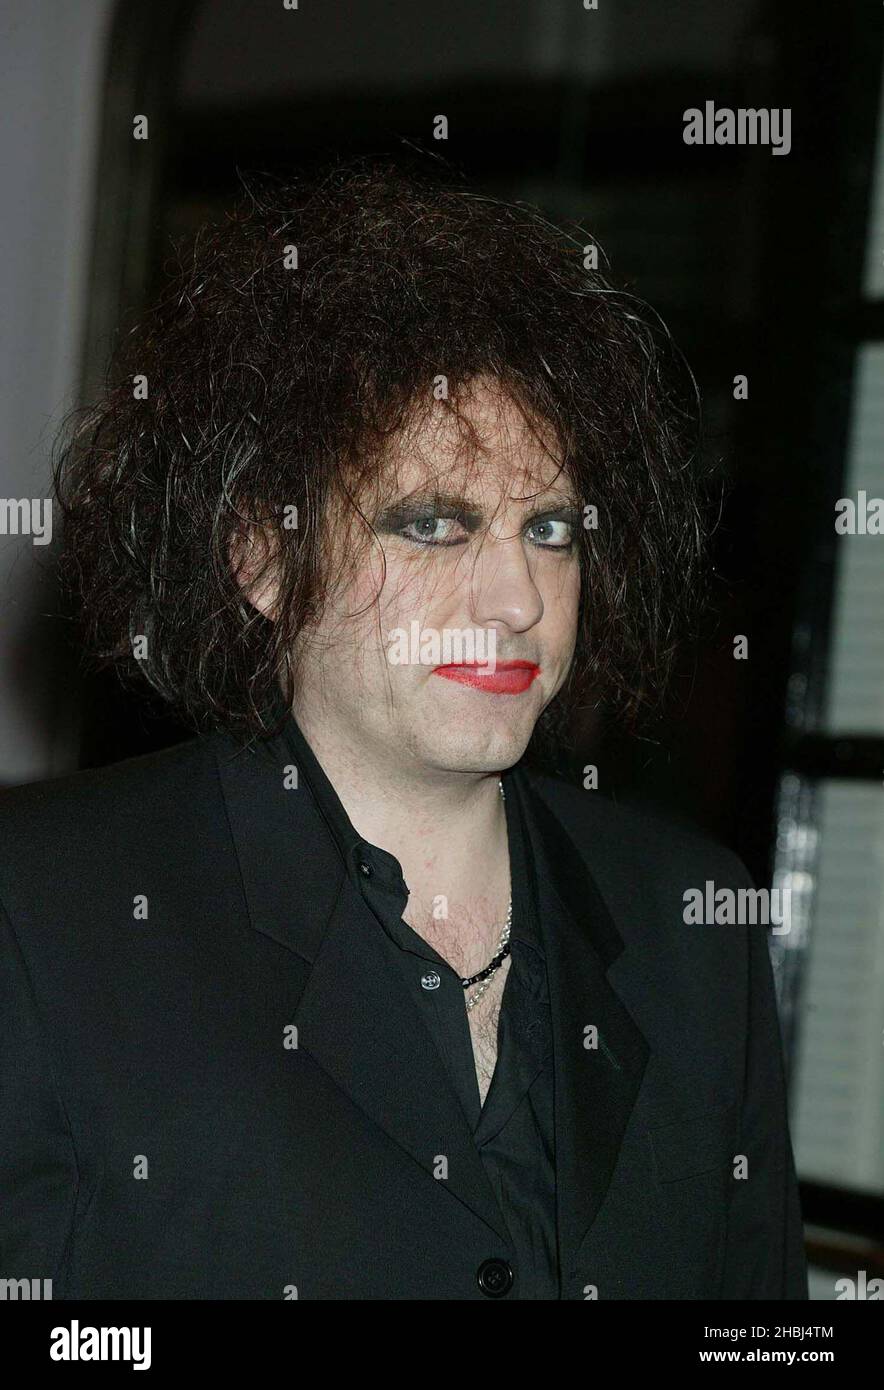 Robert Smith of the Cure at arrivals at the Q Awards, Park Lane Hotel London. Head shot Stock Photo